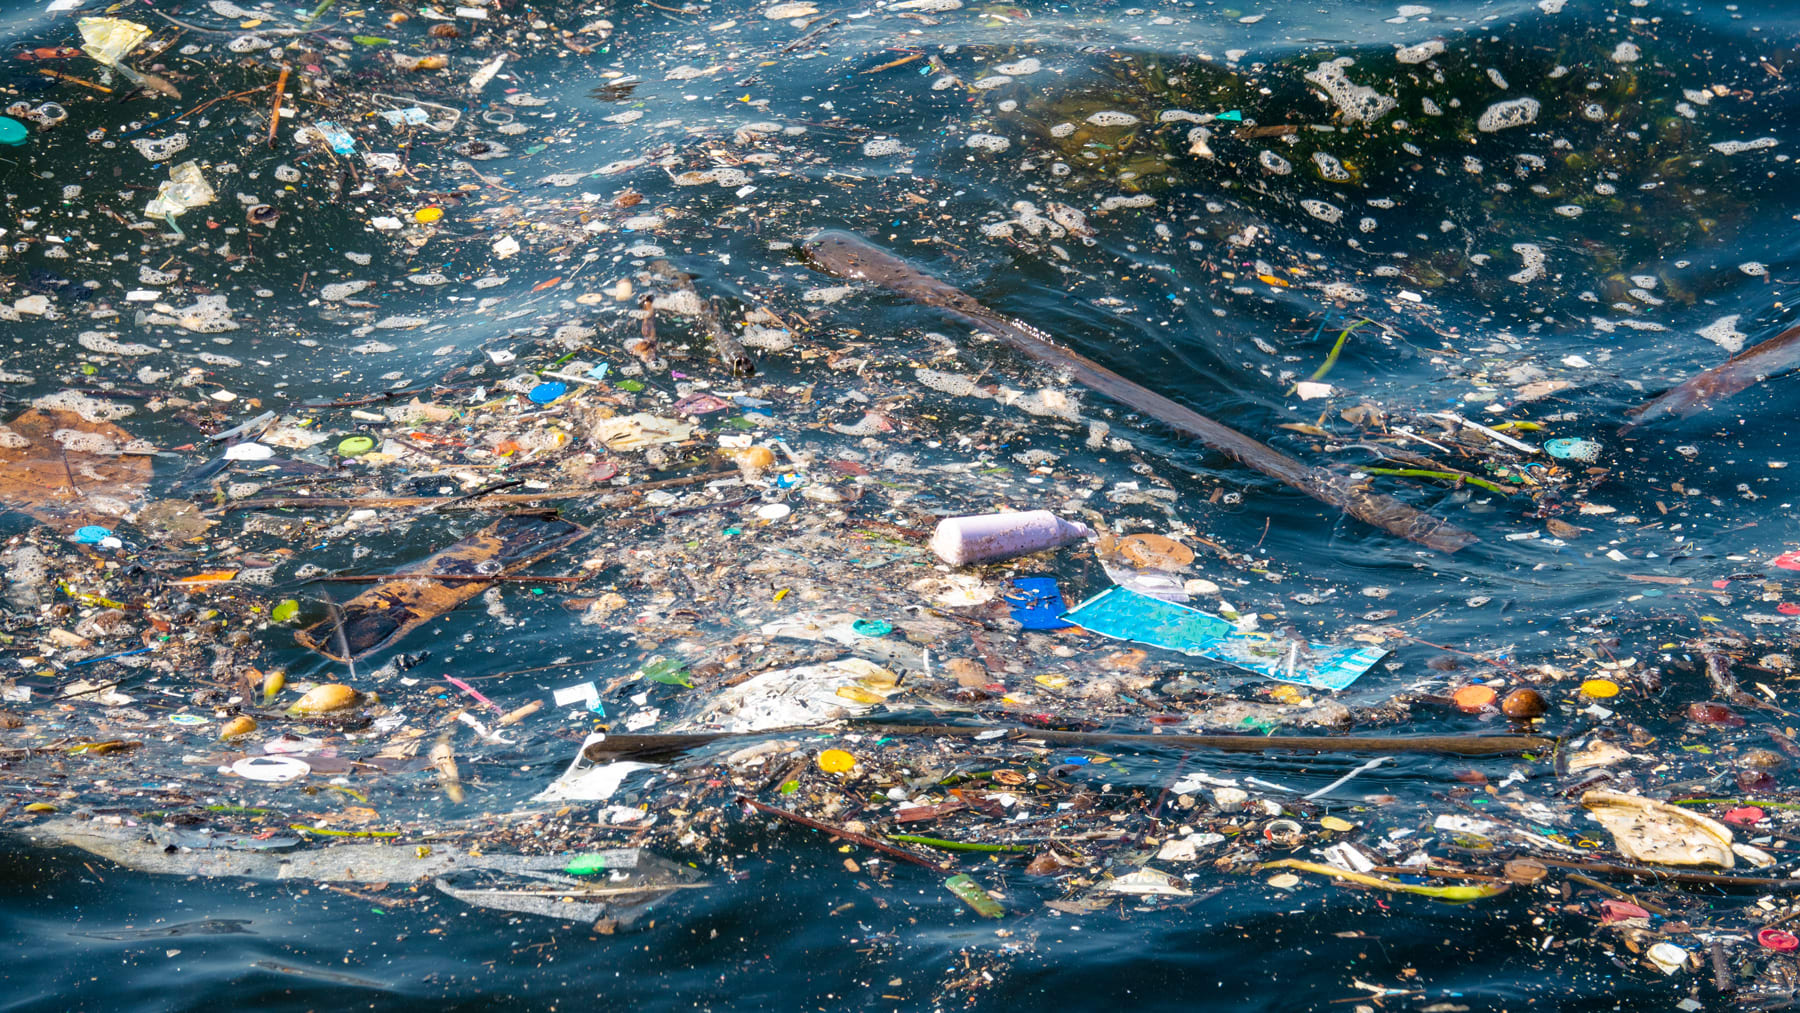 Photograph of thousands of small plastic items floating in the ocean